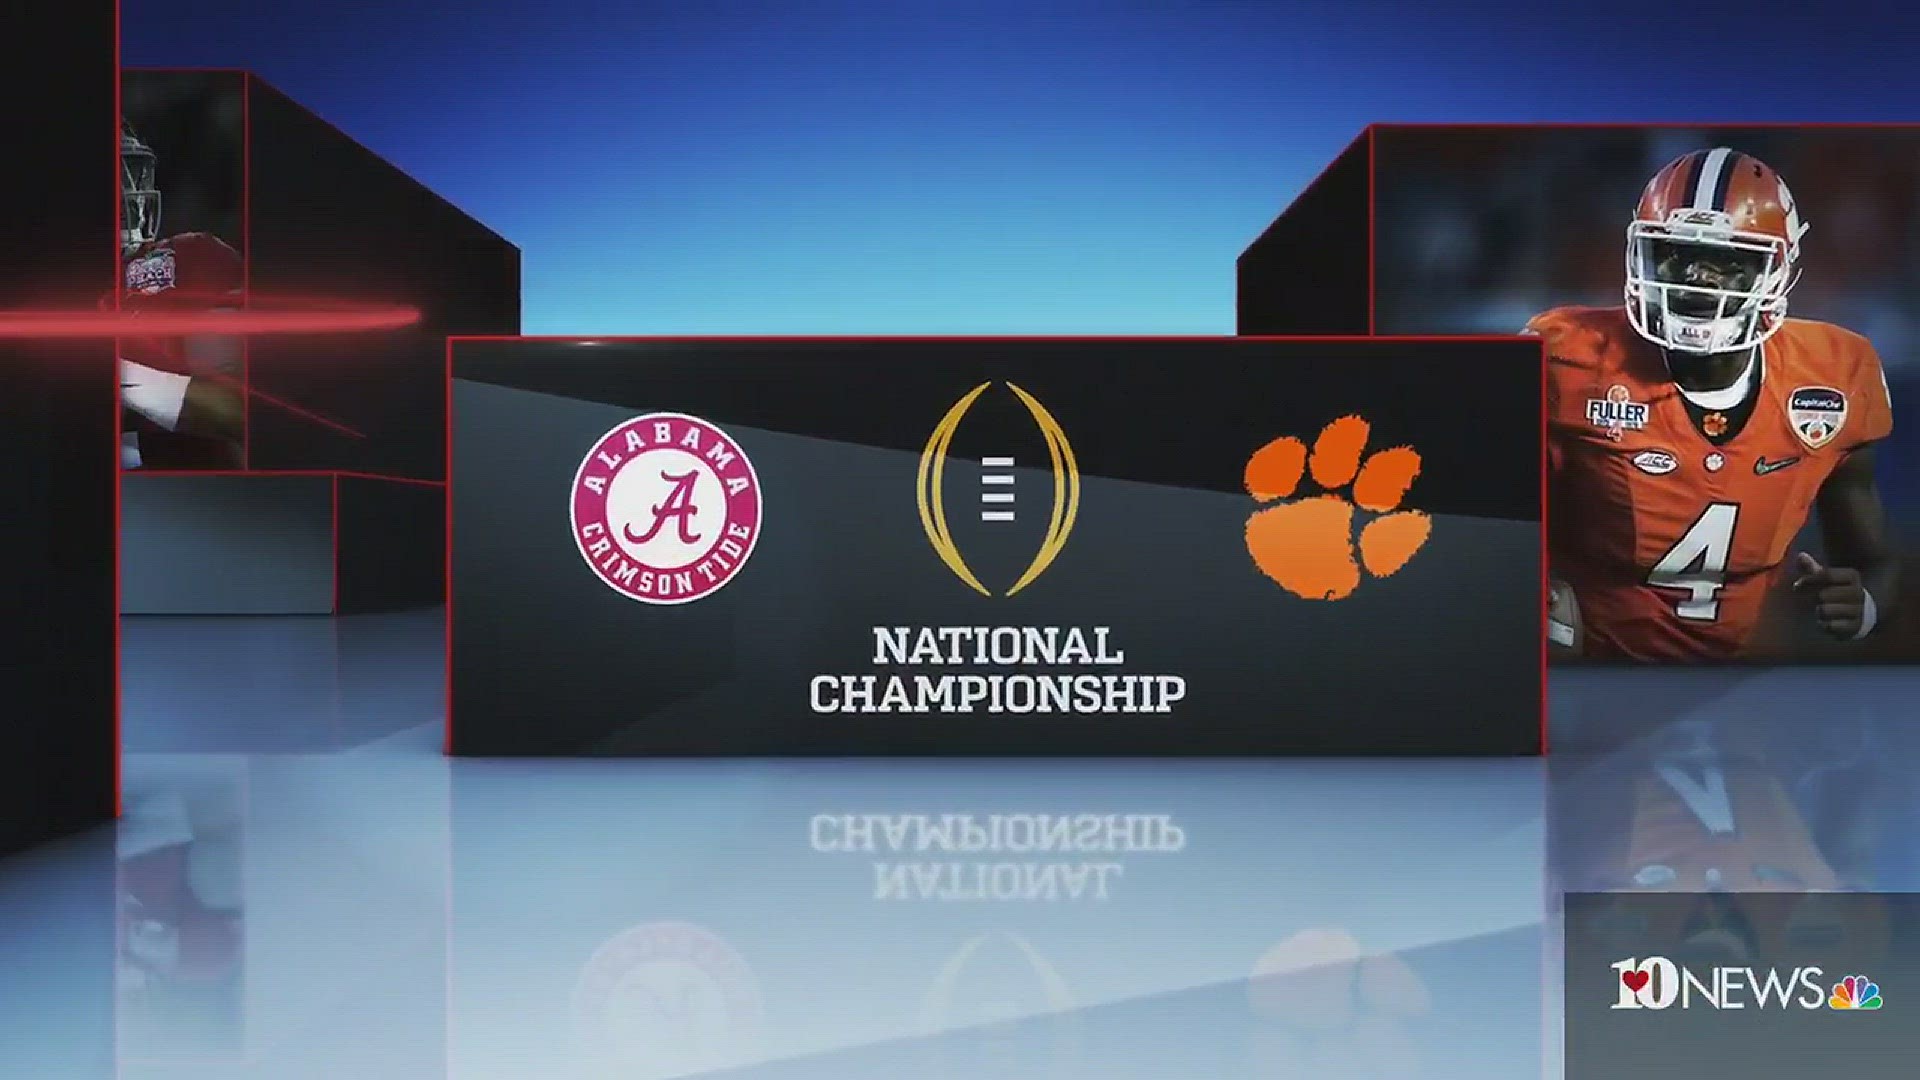 Kickoff between the Alabama Crimson Tide and the Clemson Tigers is set for 8 p.m. ET.